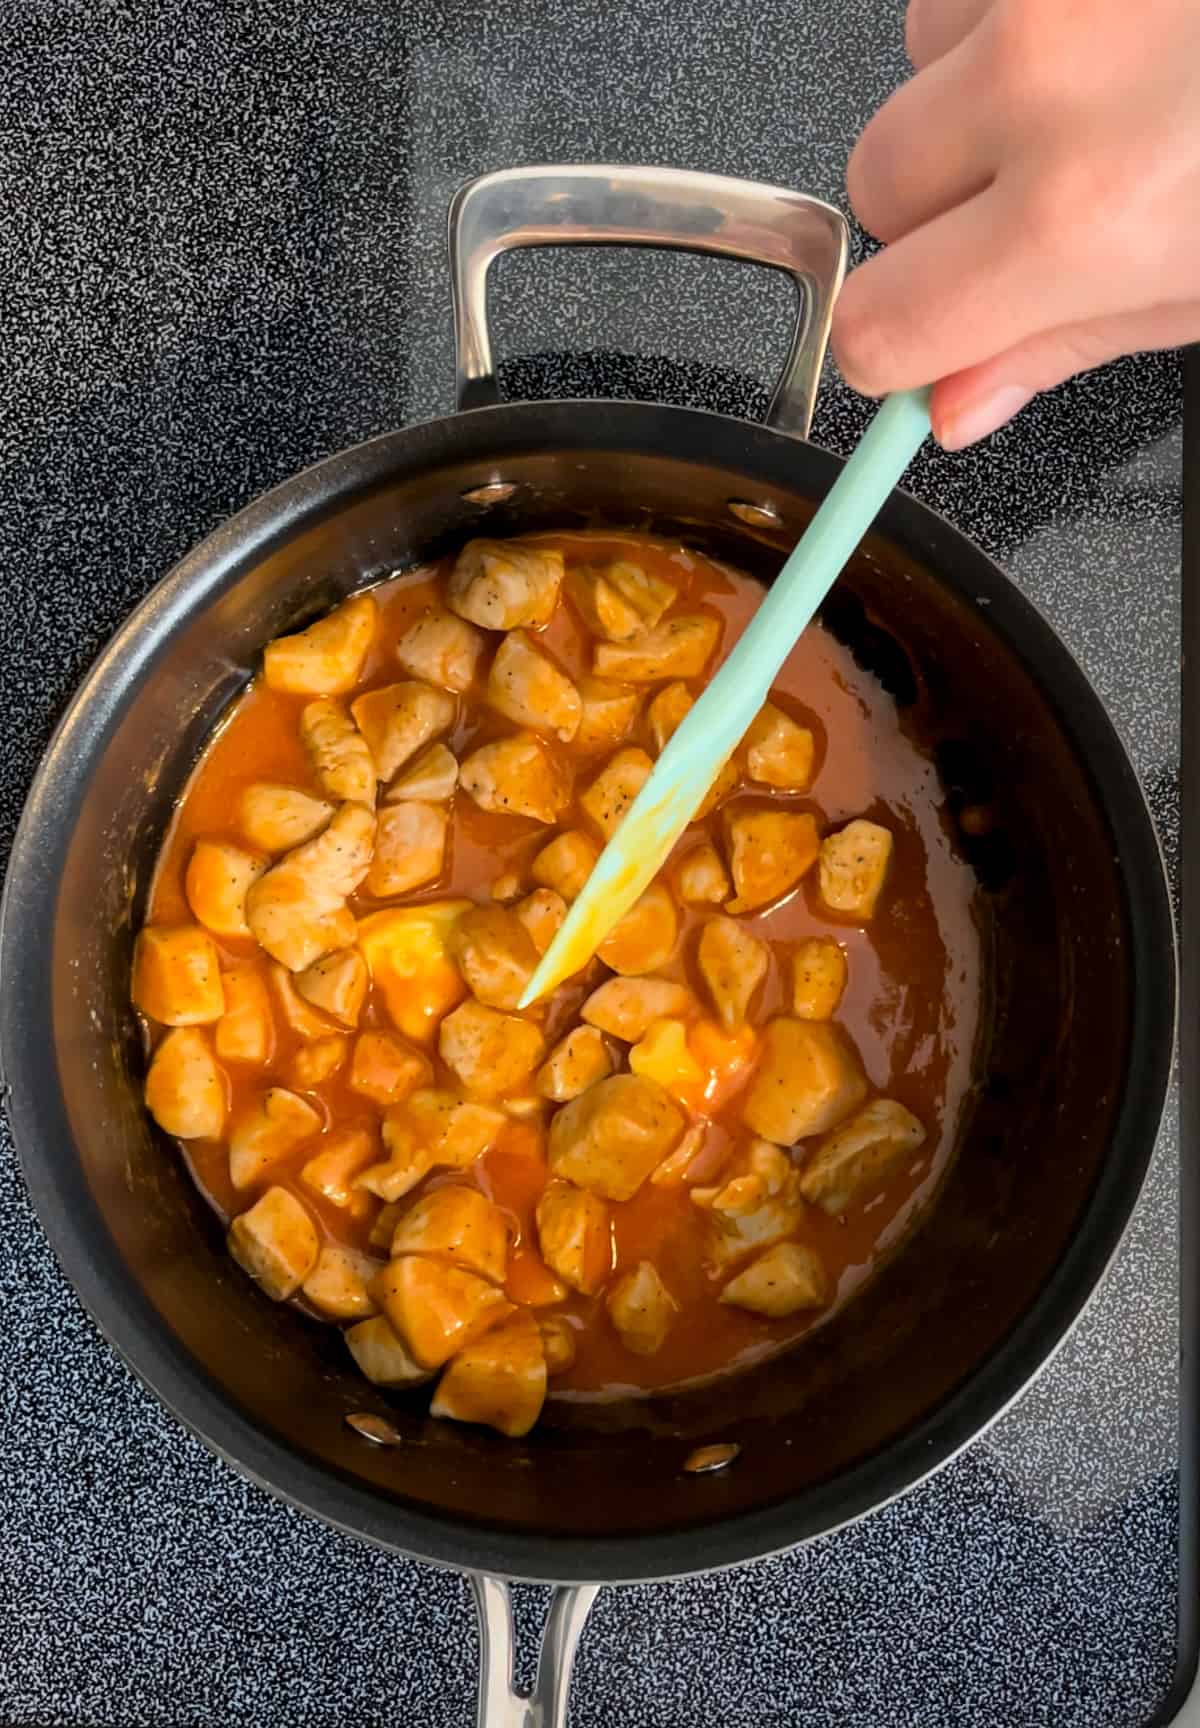 Diced chicken cooking in a pot with buffalo sauce.